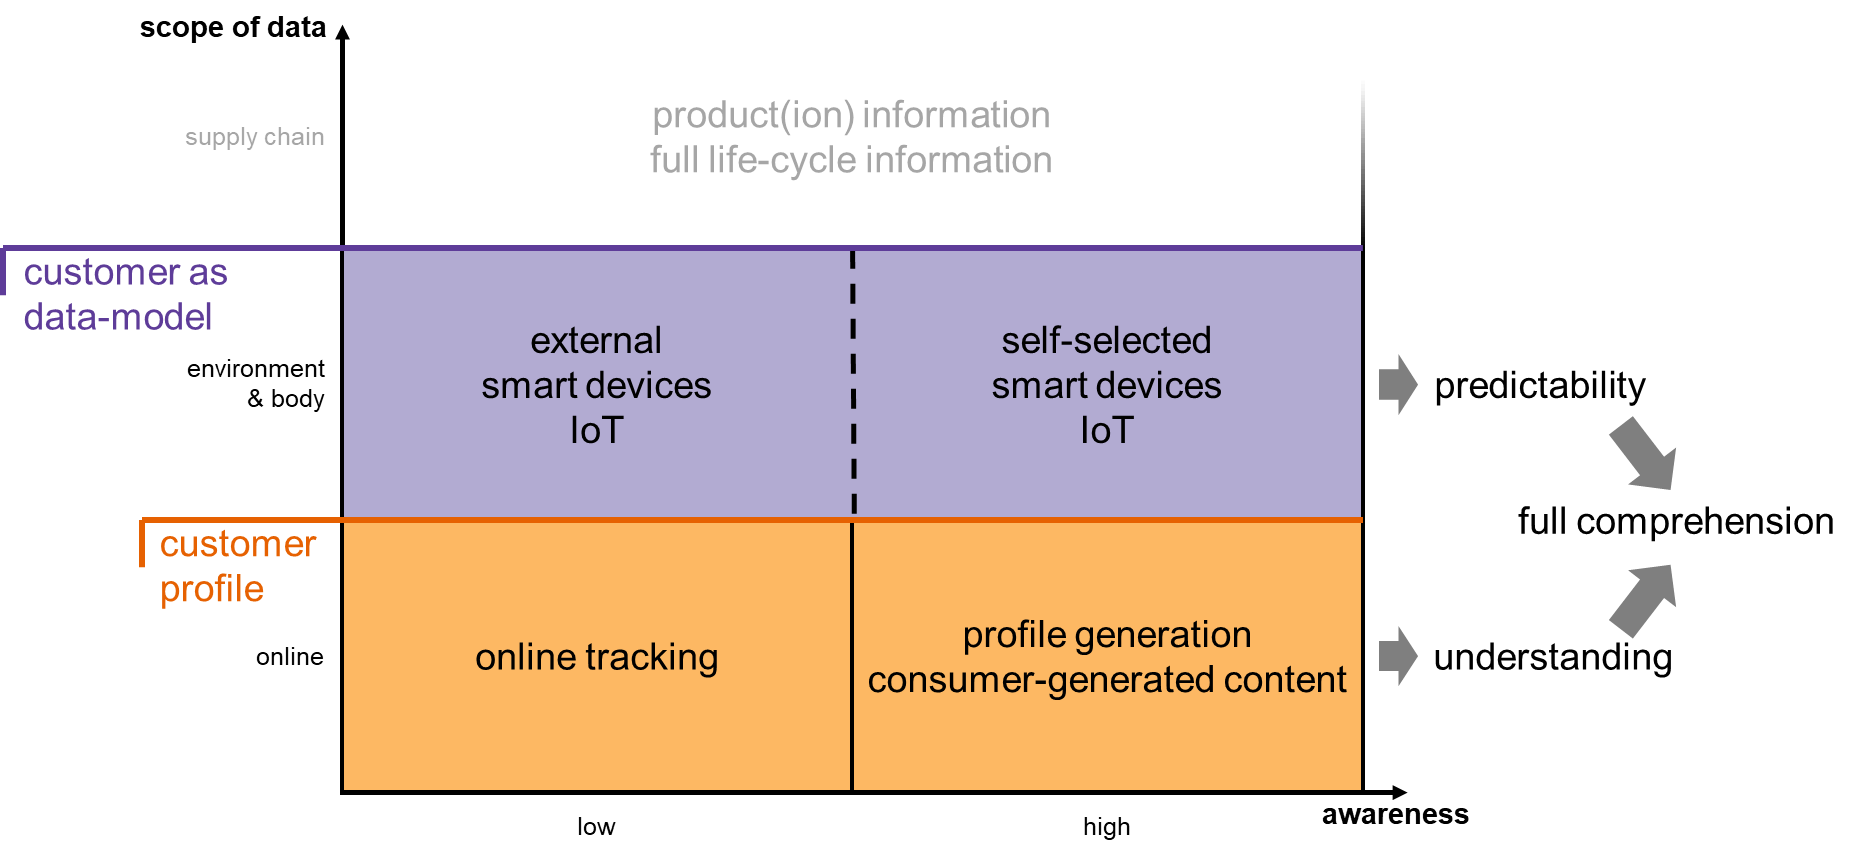 Consumers as data models based on consumer awareness and scope of data collection